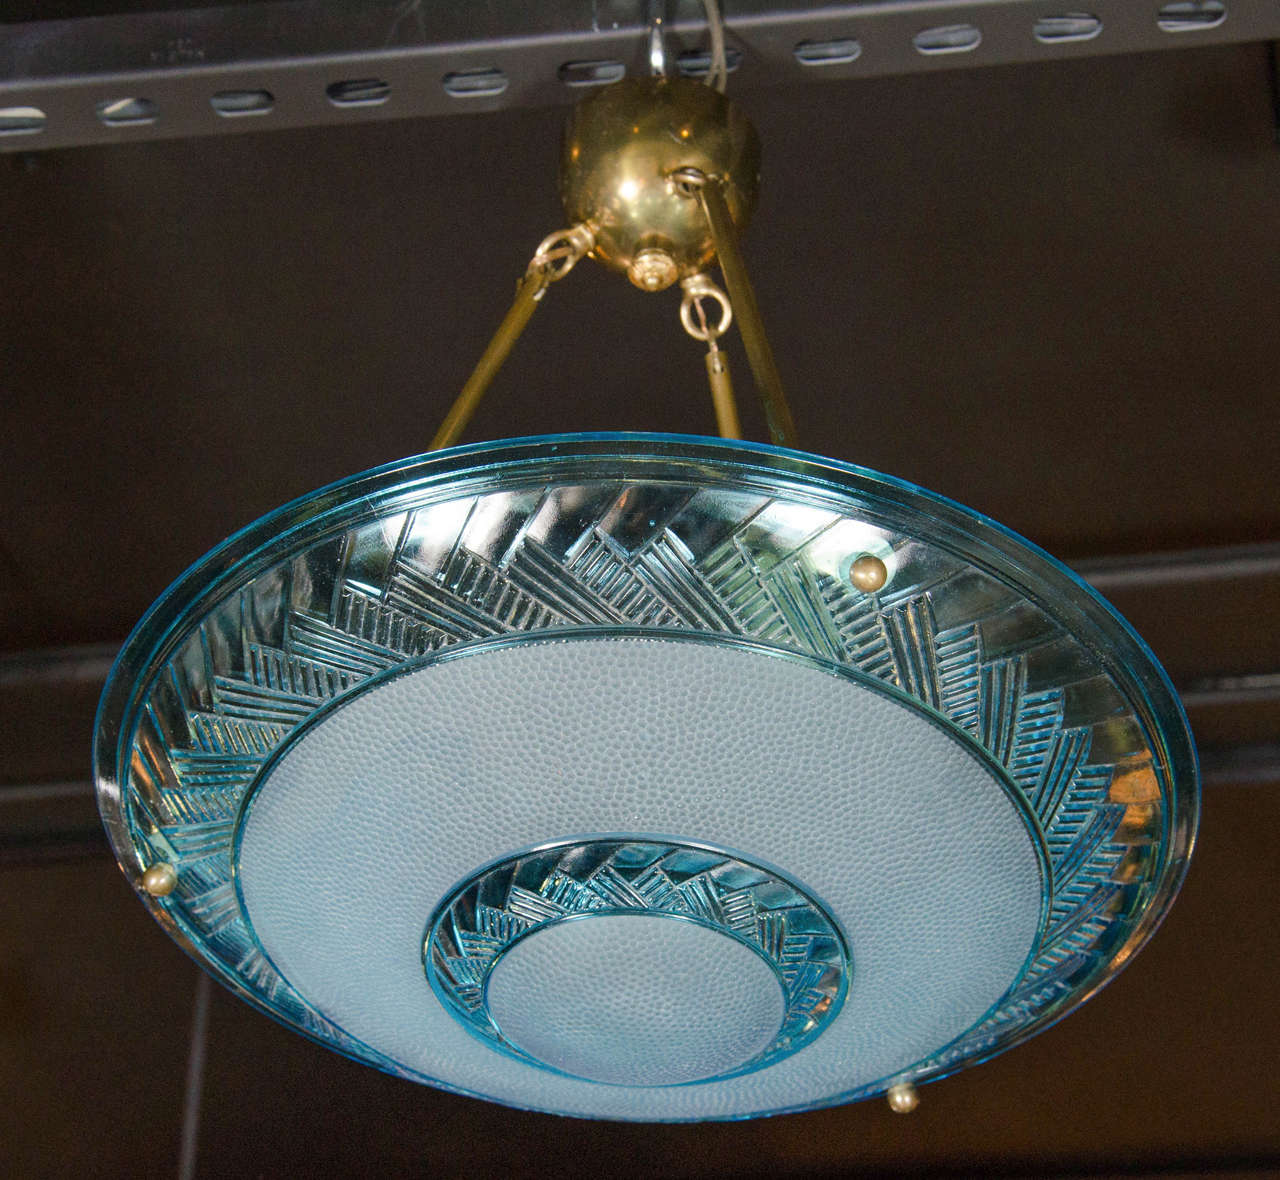 Art Deco flush mount chandelier by Degue with a blue glass inverted dome supported by antique brass fittings and three lights. This flush mount chandelier features two concentric stylized herring bone pattern bands against a pebble textured